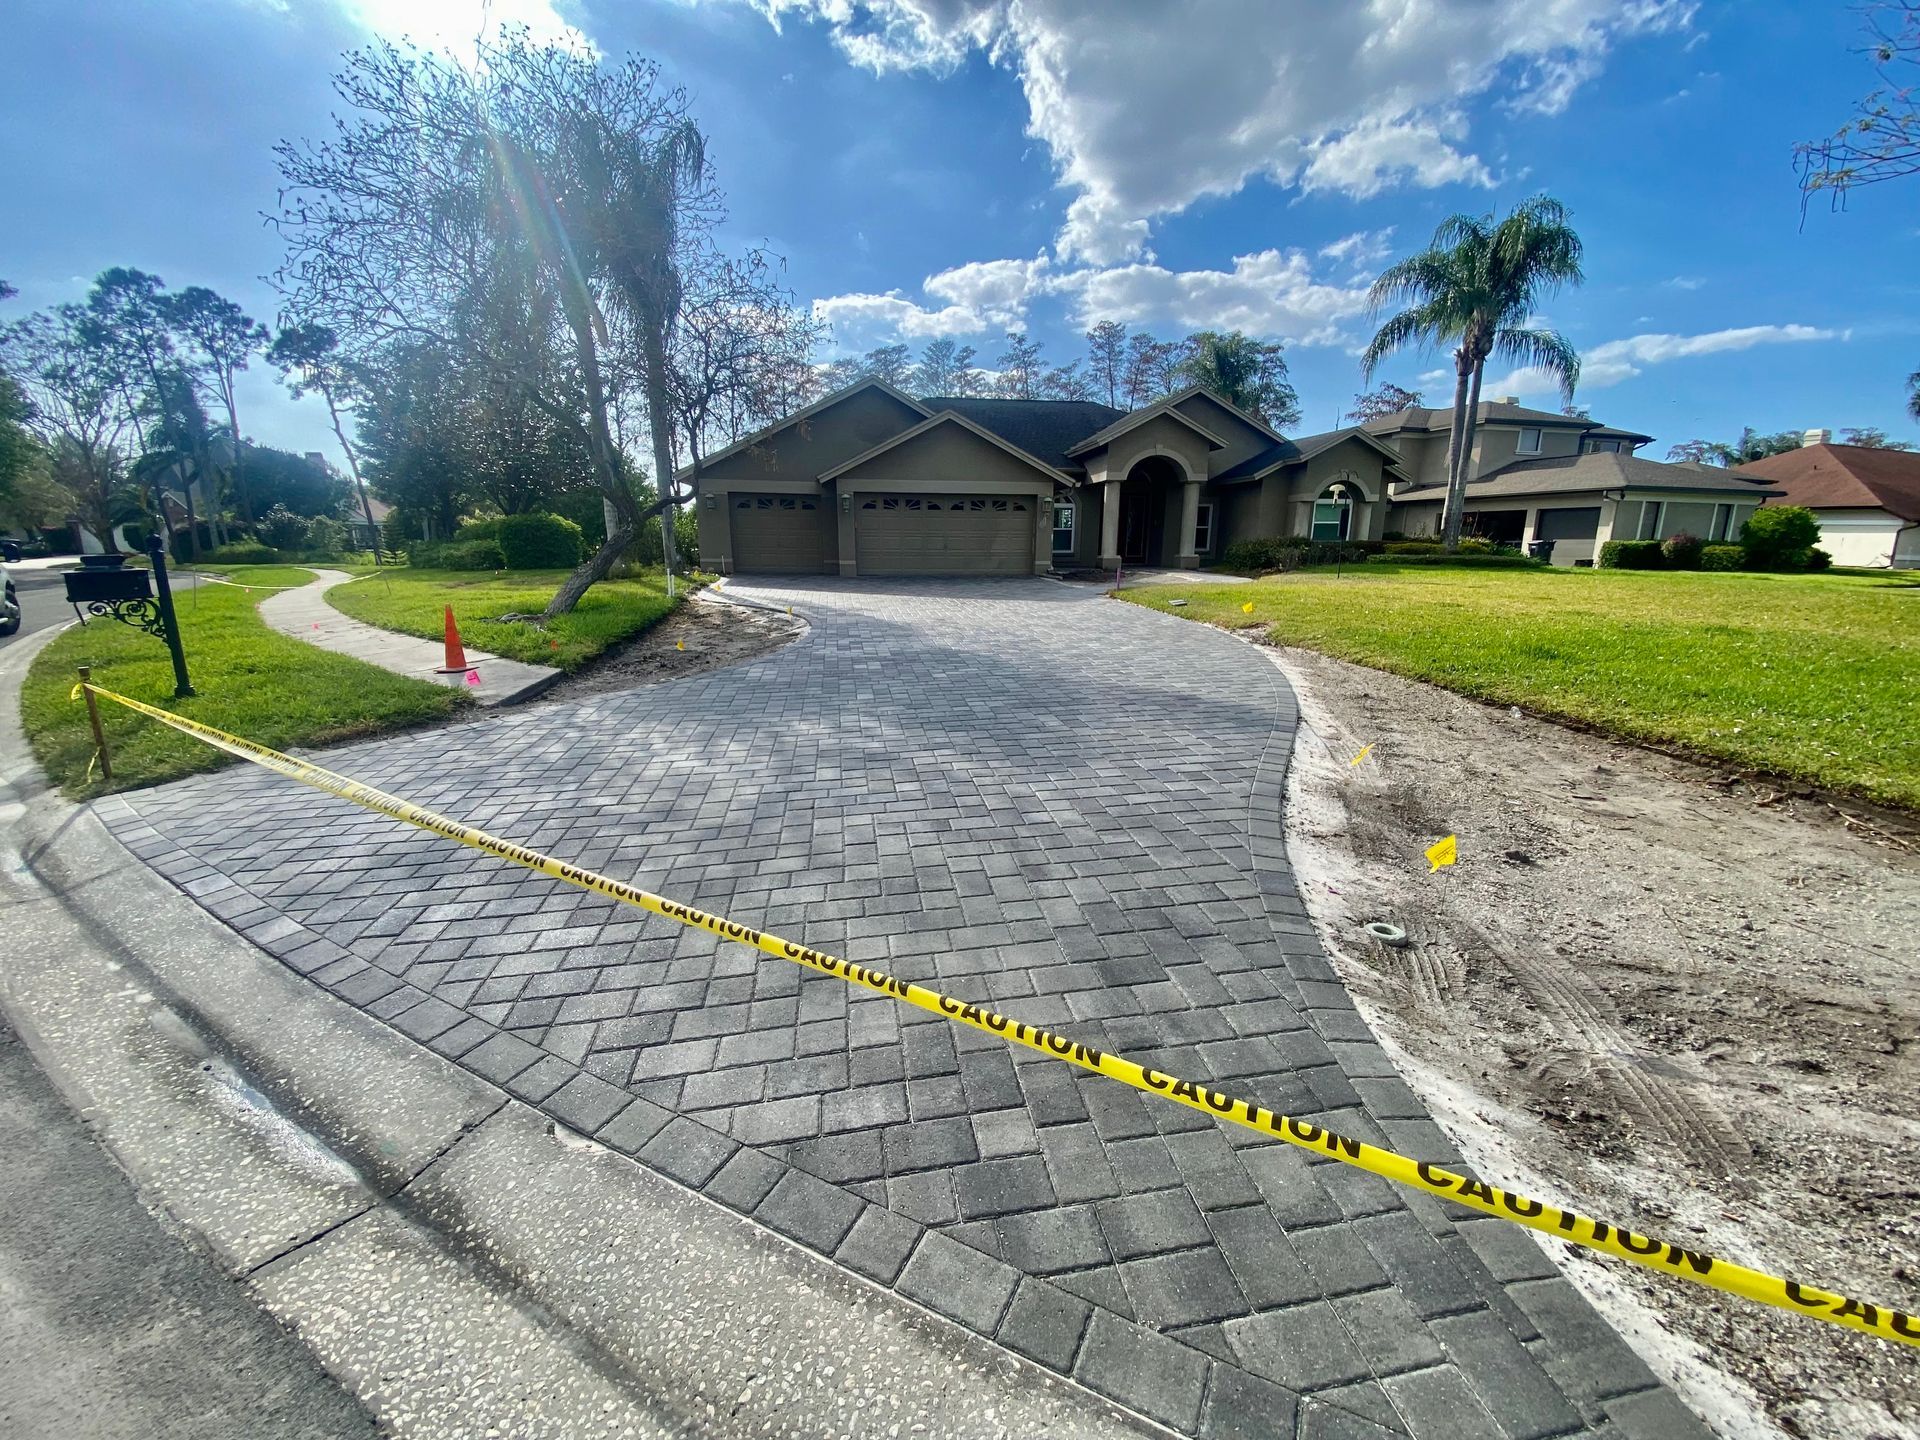 Flagstone - Union in Gray/Charcoal. Brick Paver Driveway in Tampa, FL